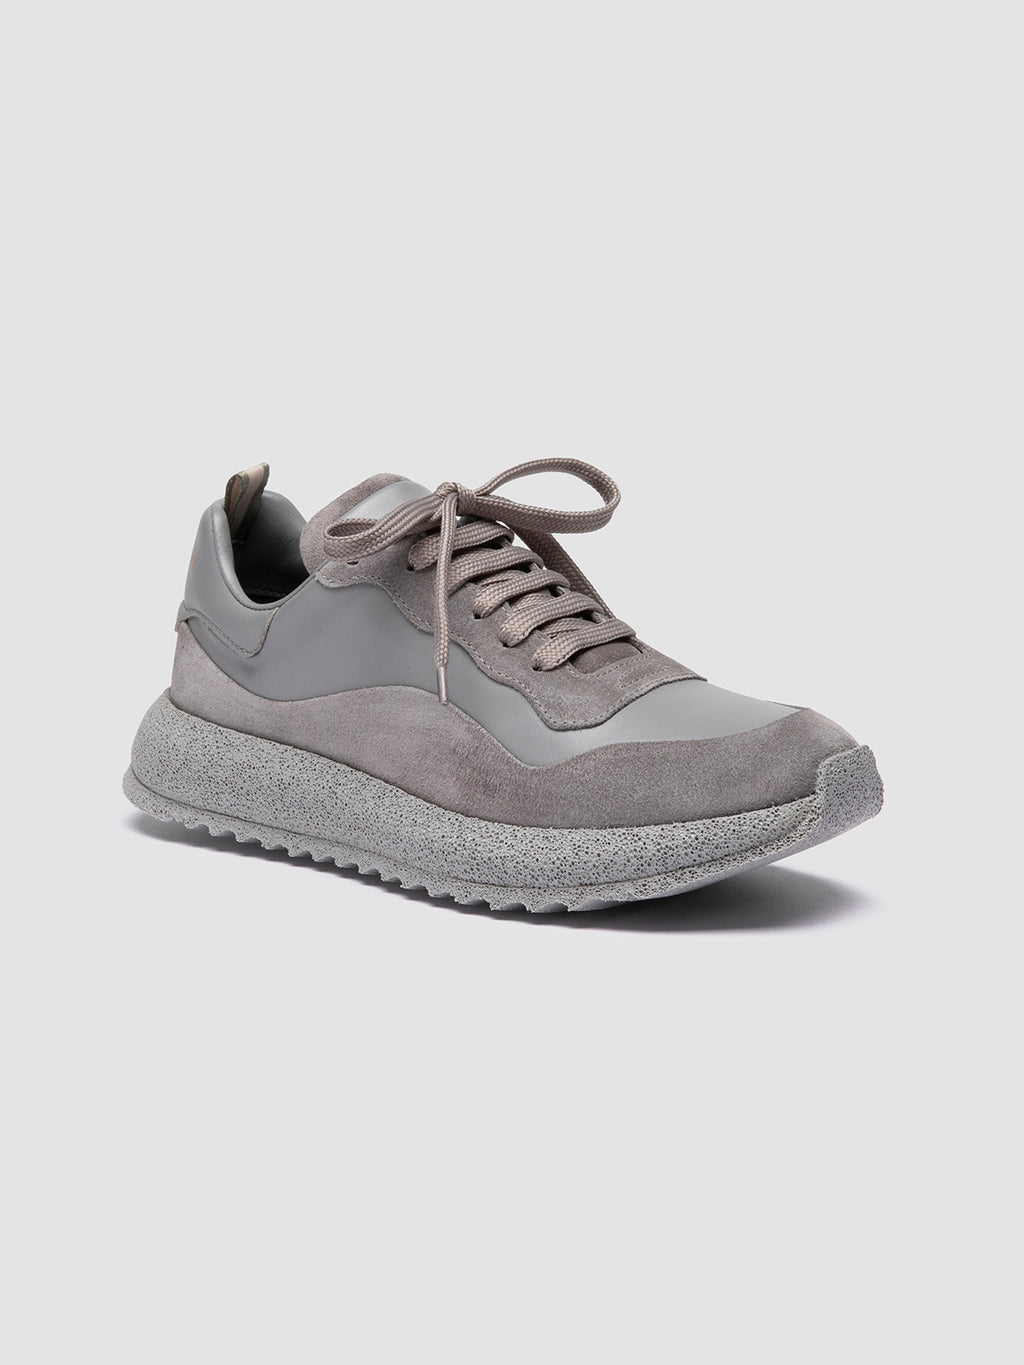 RACE RUBREX 101 - Grey Leather and Suede Low Top Sneakers